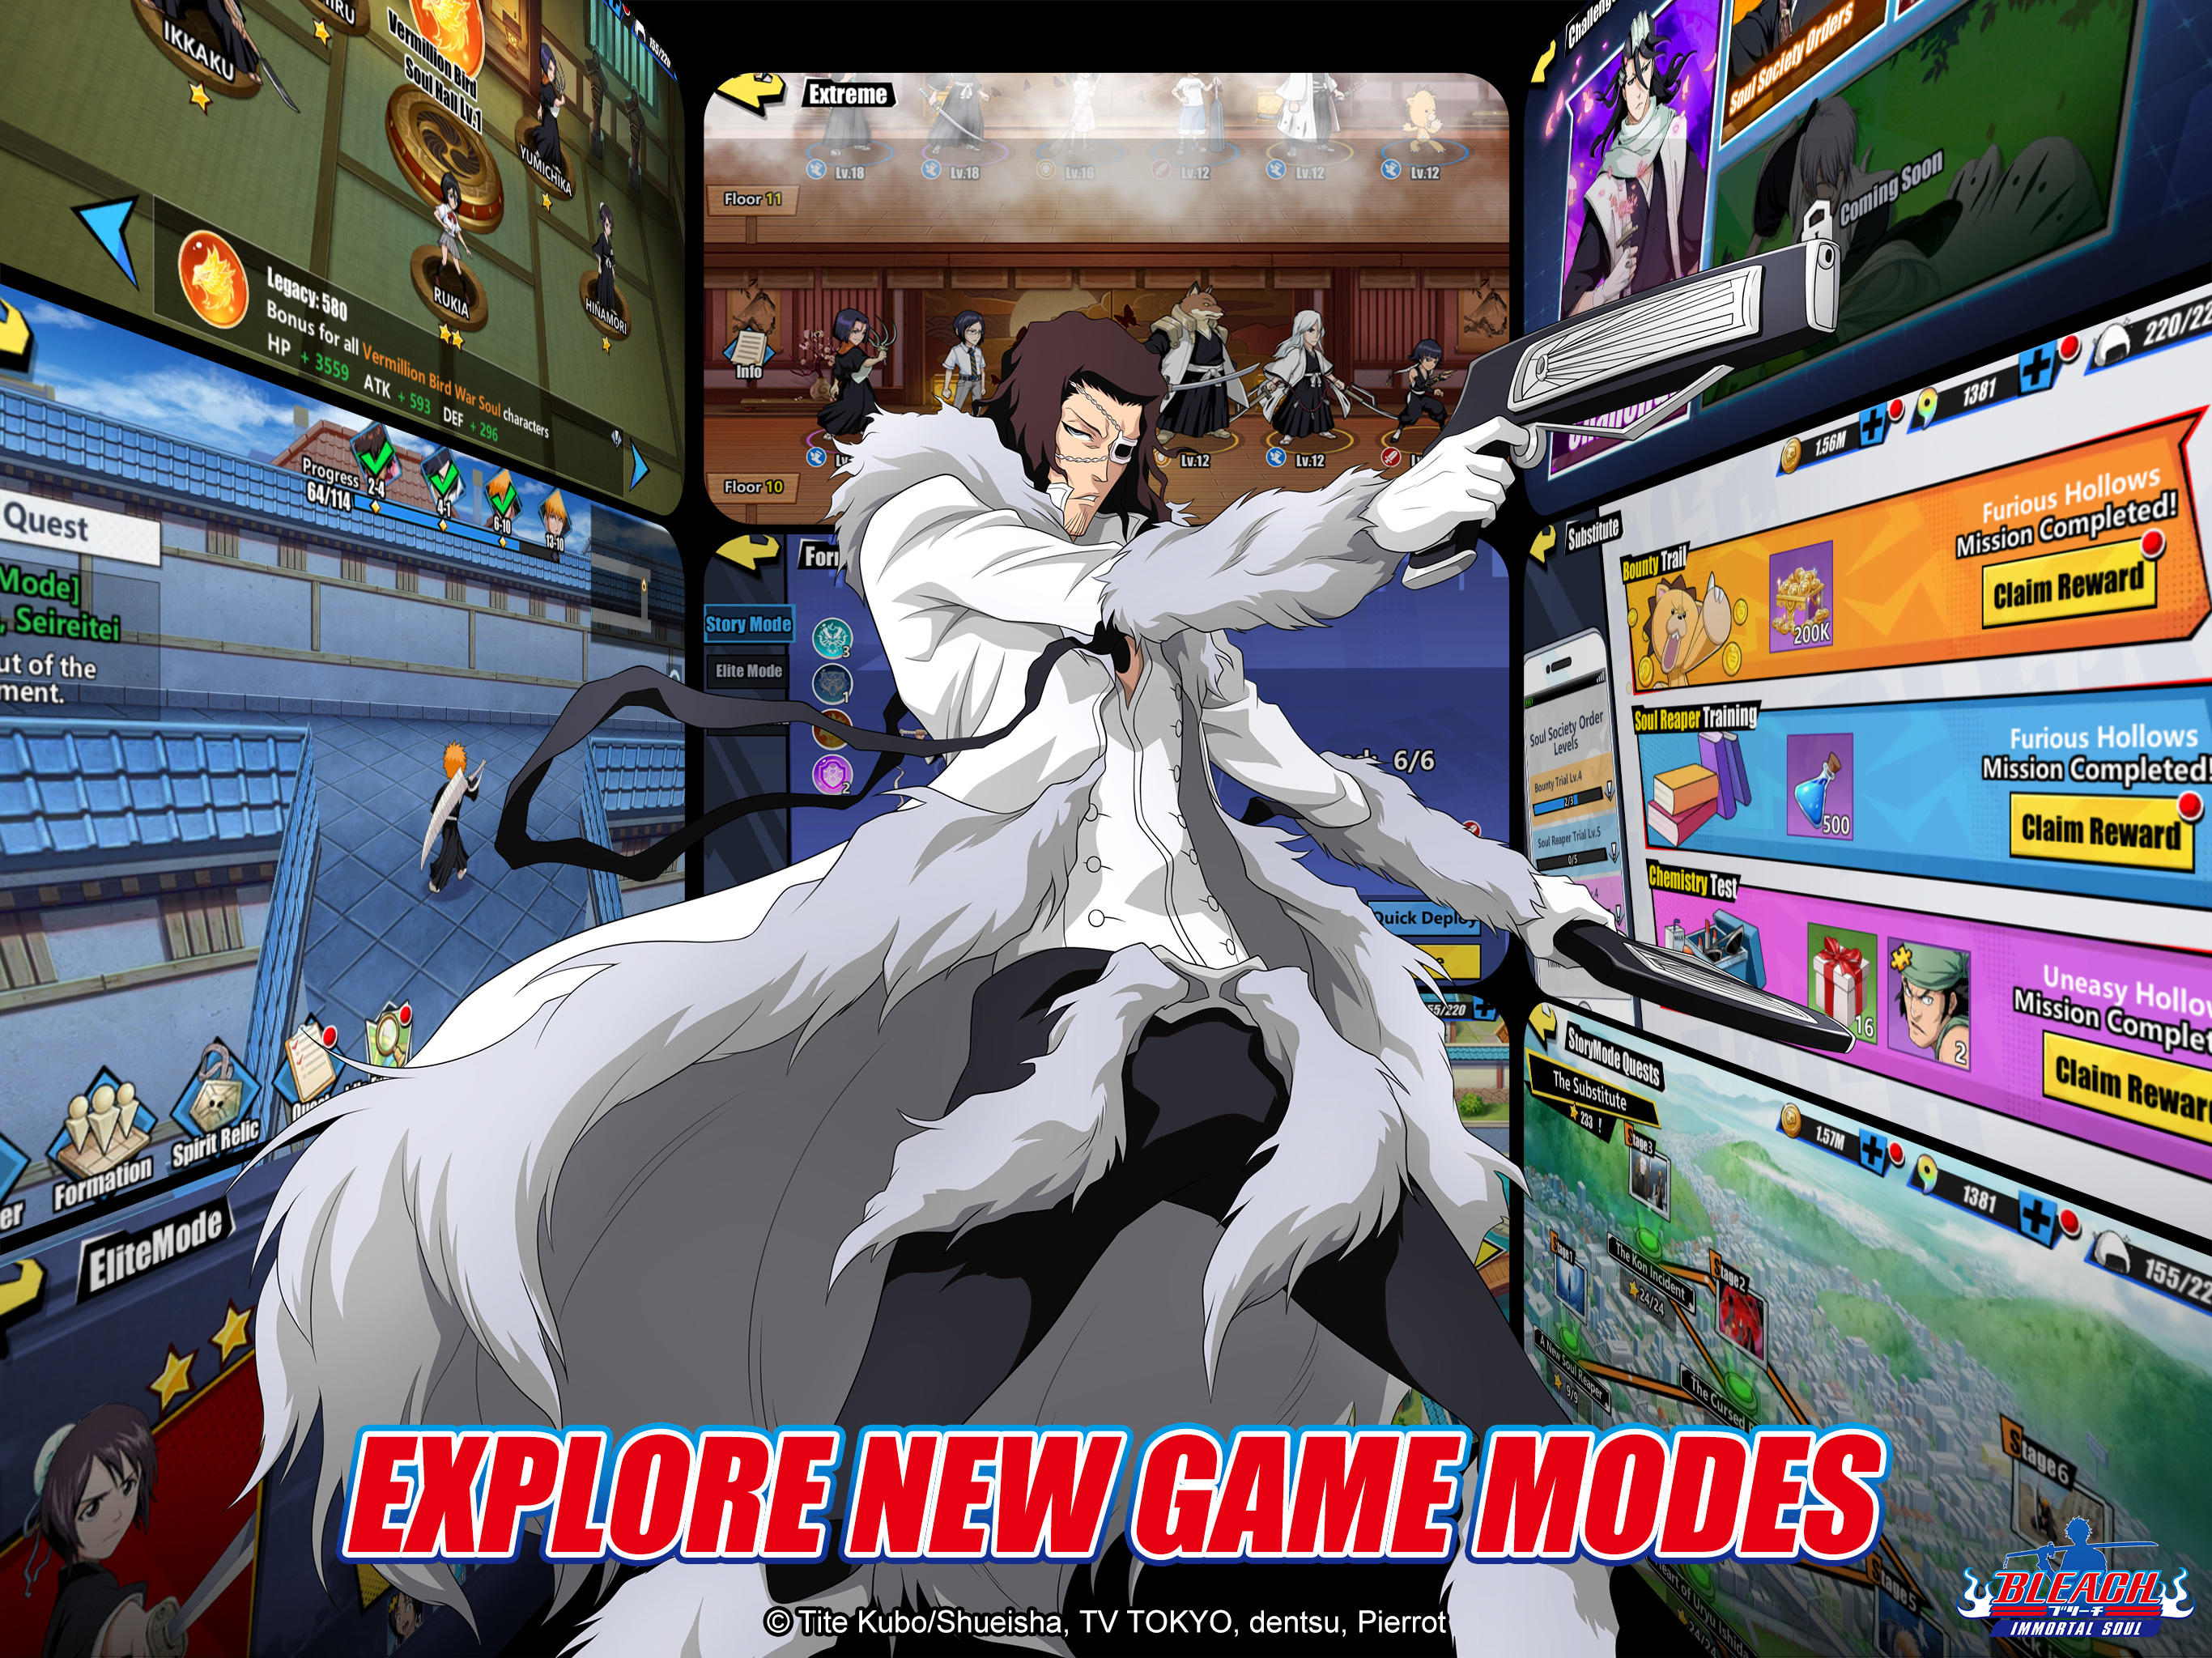 Crunchyroll - Bleach fans, rejoice! The new officially licensed RPG mobile  game Bleach: Immortal Soul is available now! Awaken your inner Soul Reaper  and begin your epic adventure to Soul Society today.